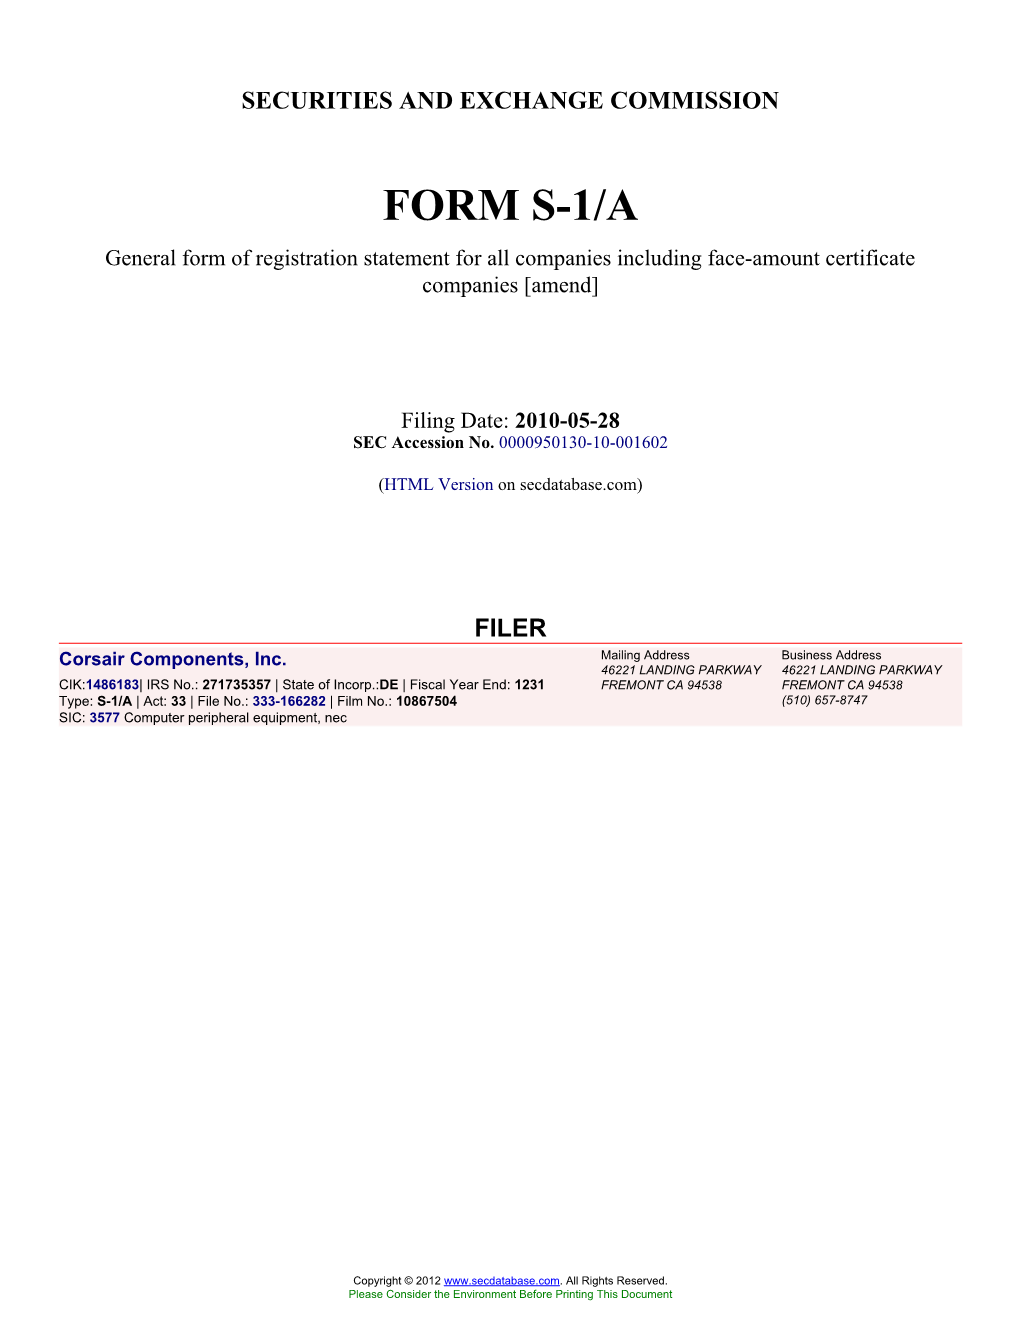 Form: S-1/A, Filing Date: 05/28/2010